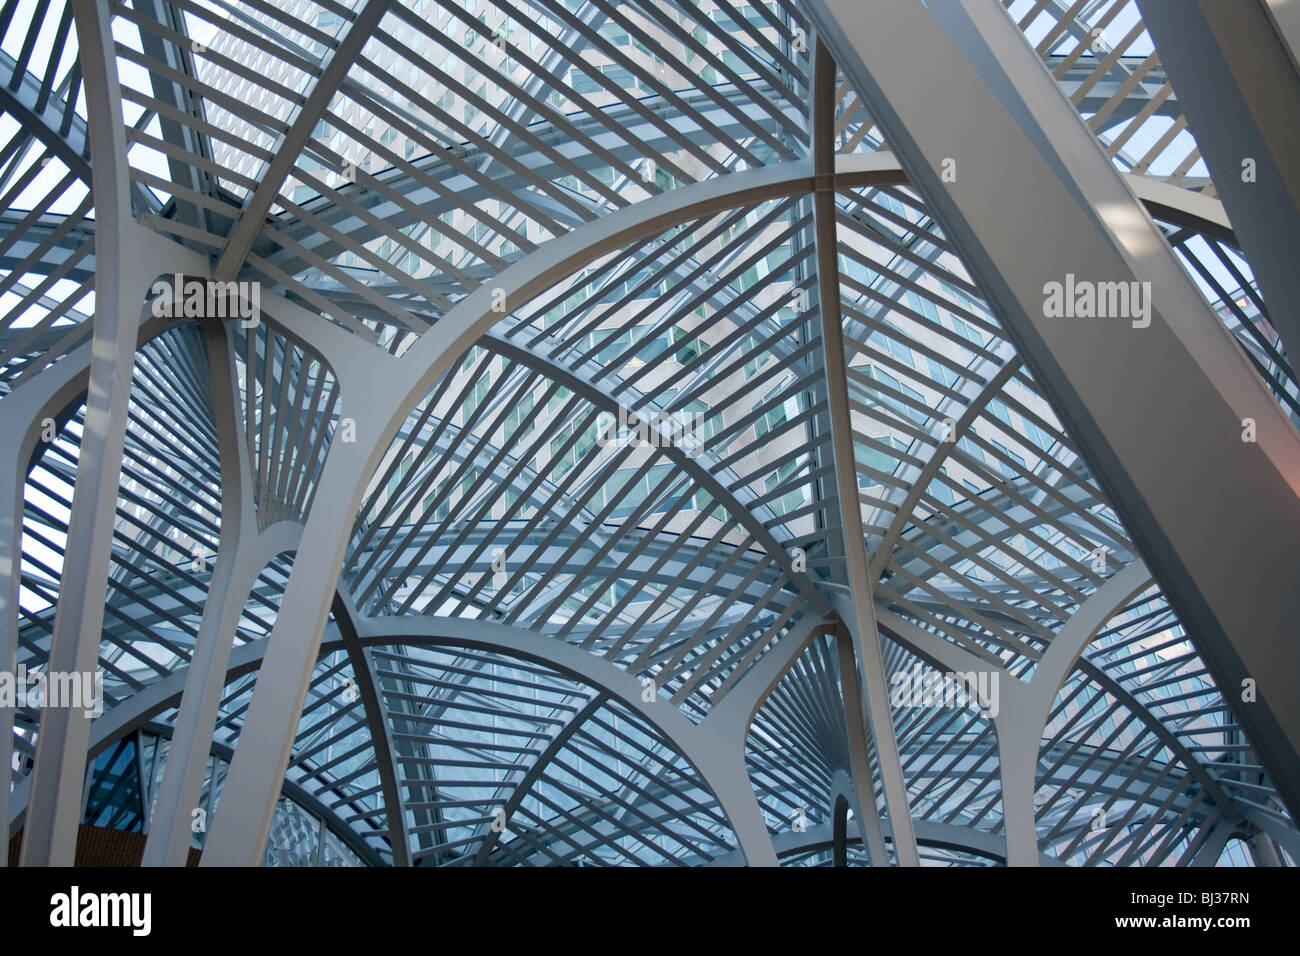 The famous arch support structure inside brookfield place (previously bce place) during the day Stock Photo